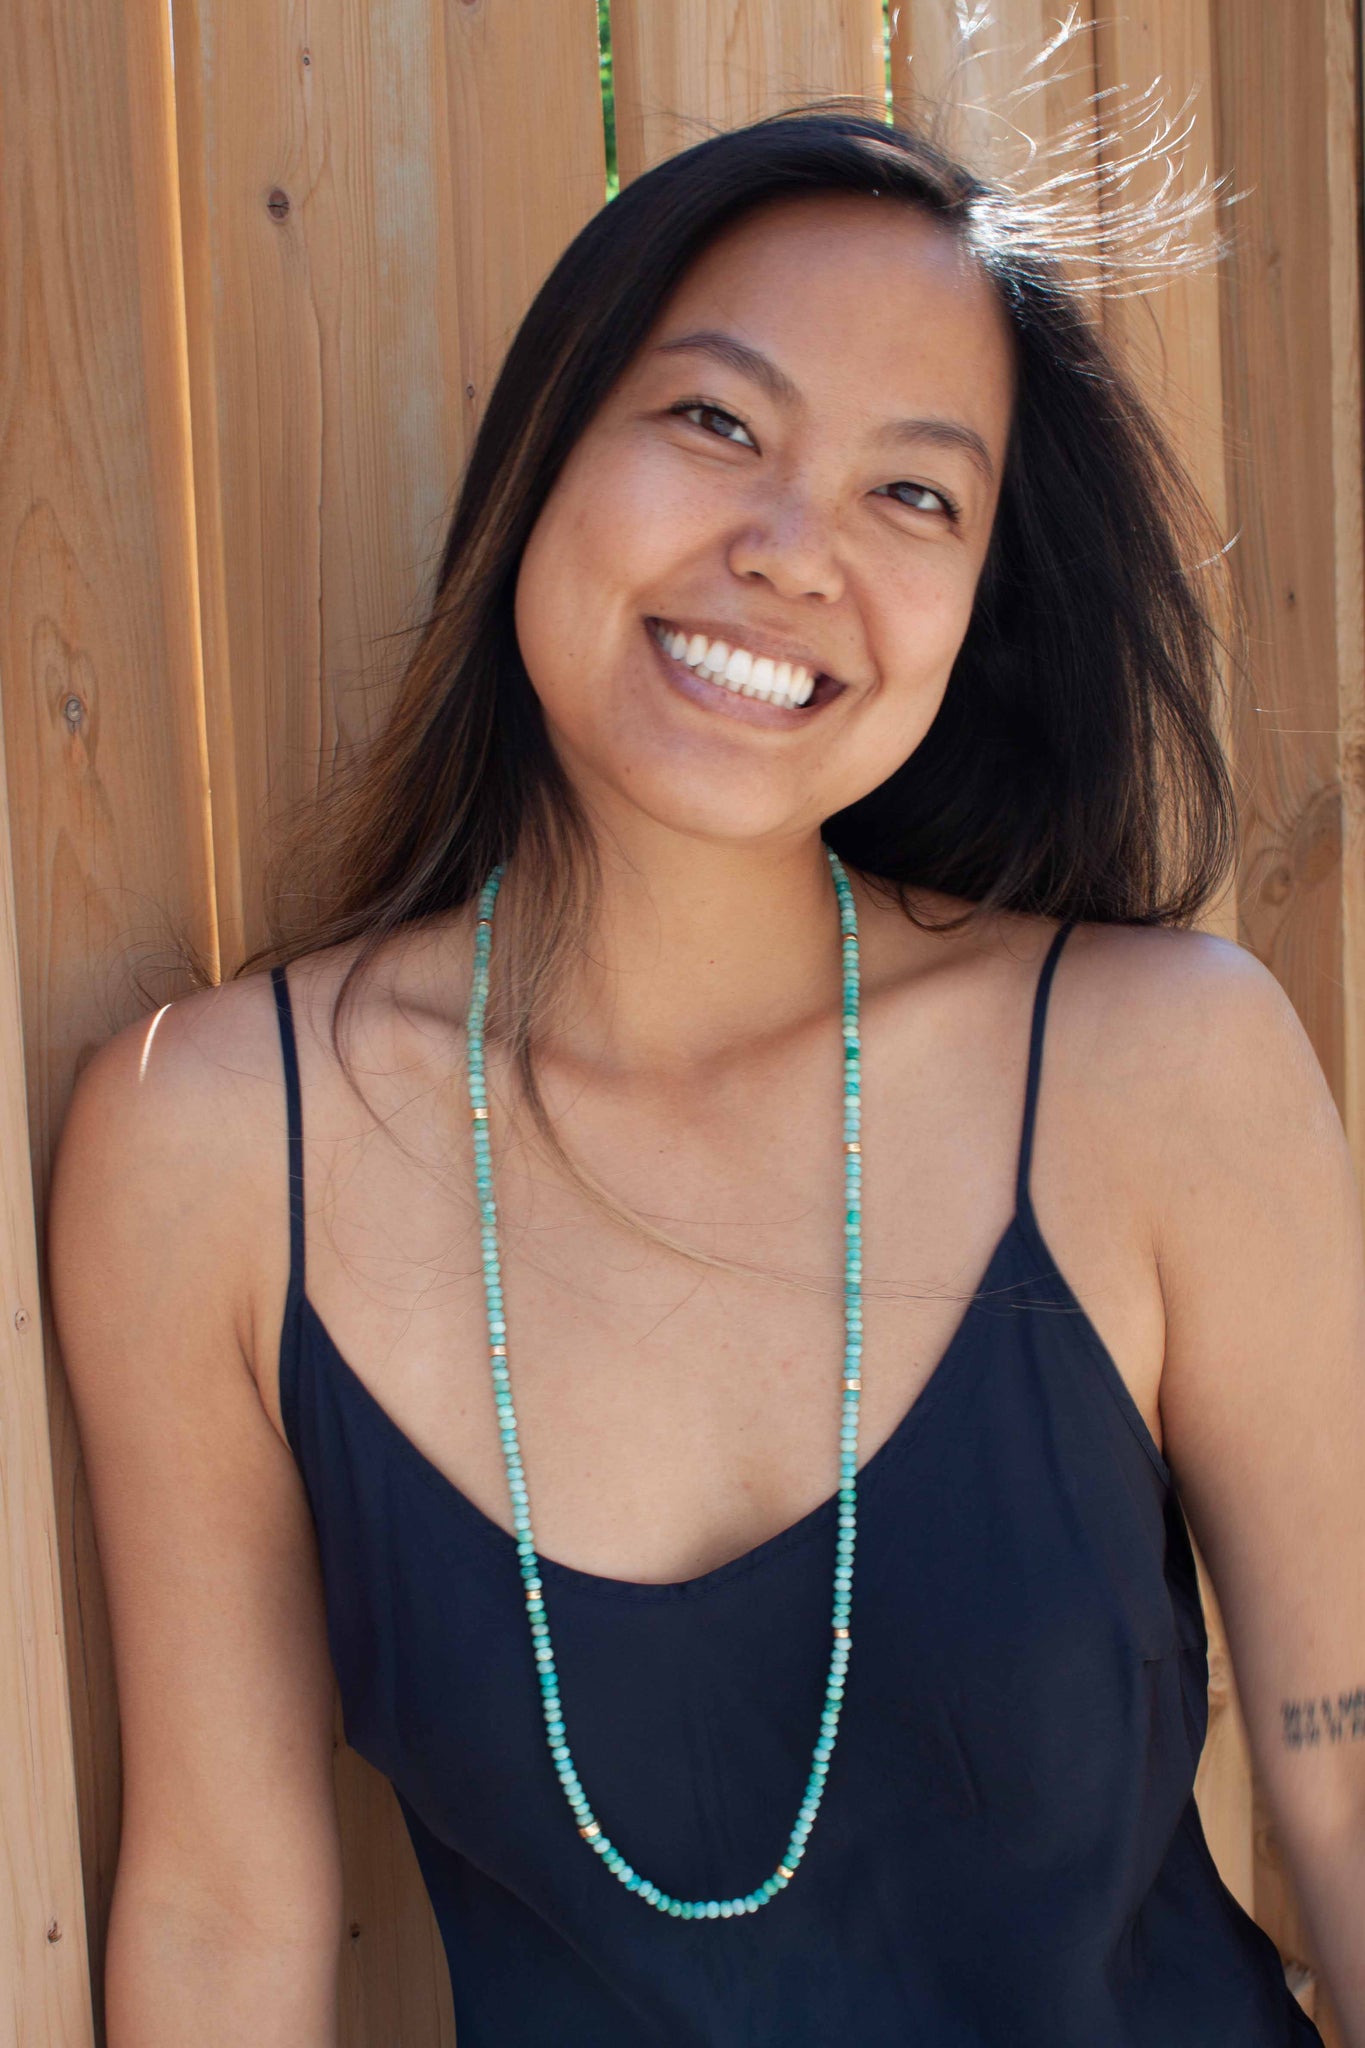 Meet our beautifully long and versatile amazonite & gold necklace that can be worn 4 different ways! 30 inch faceted amazonite and gold beaded necklace (and bracelet if you want to!). Handmade in Toronto by kp jewelry co. 